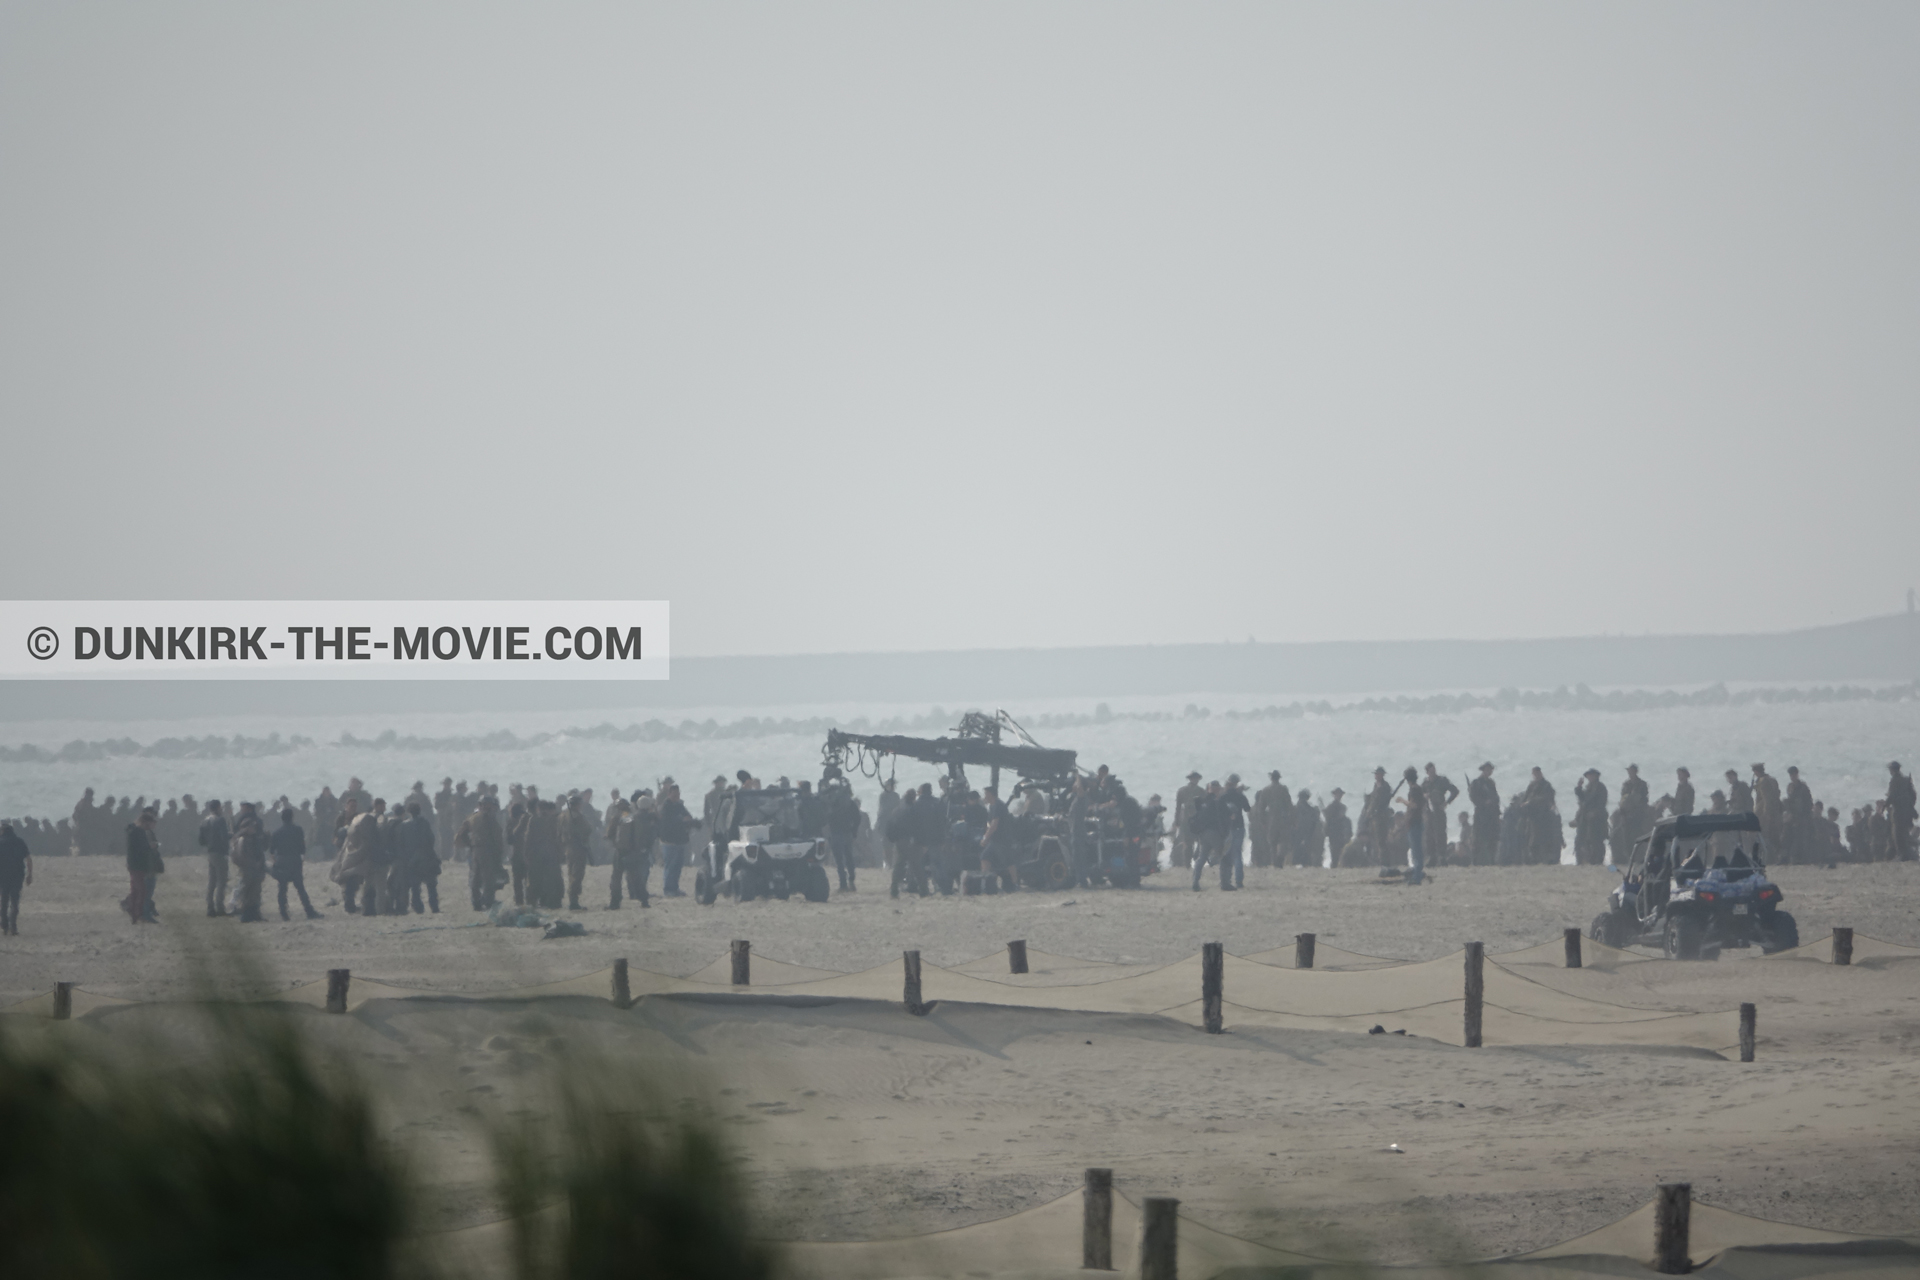 Picture with supernumeraries, beach, technical team,  from behind the scene of the Dunkirk movie by Nolan